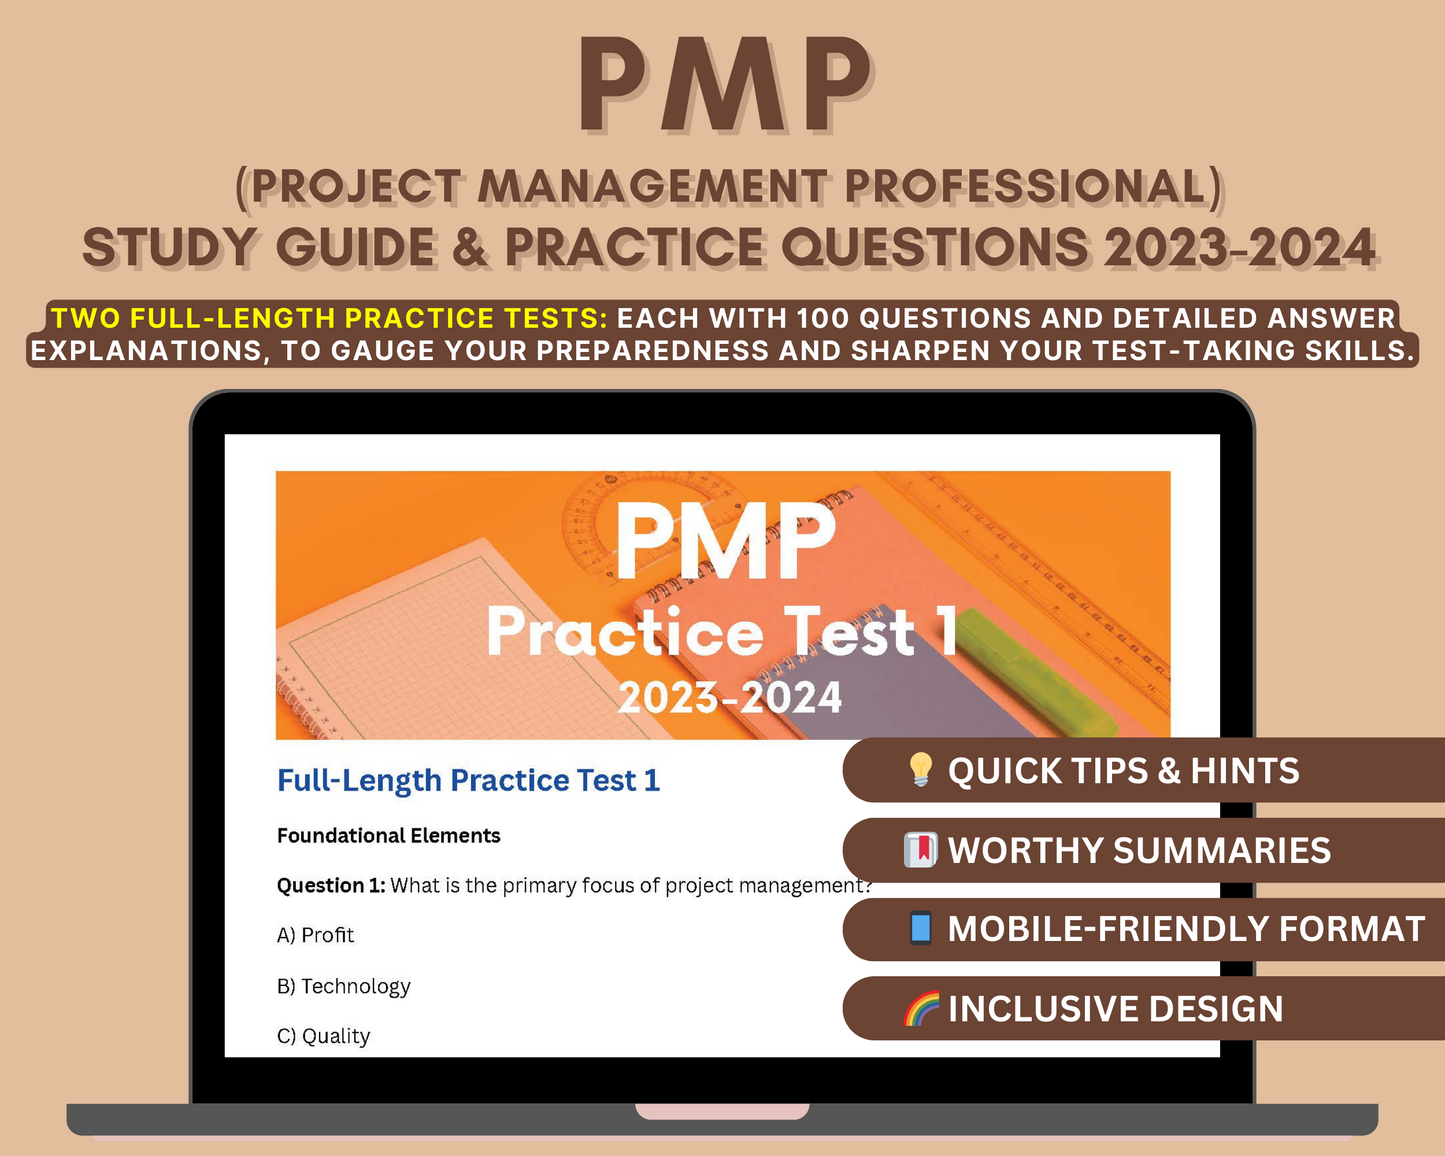 PMP Exam Prep 2023-2024: In-Depth Content Review, Practice Tests & Strategies for Project Management Professional Exam | PMP Certification